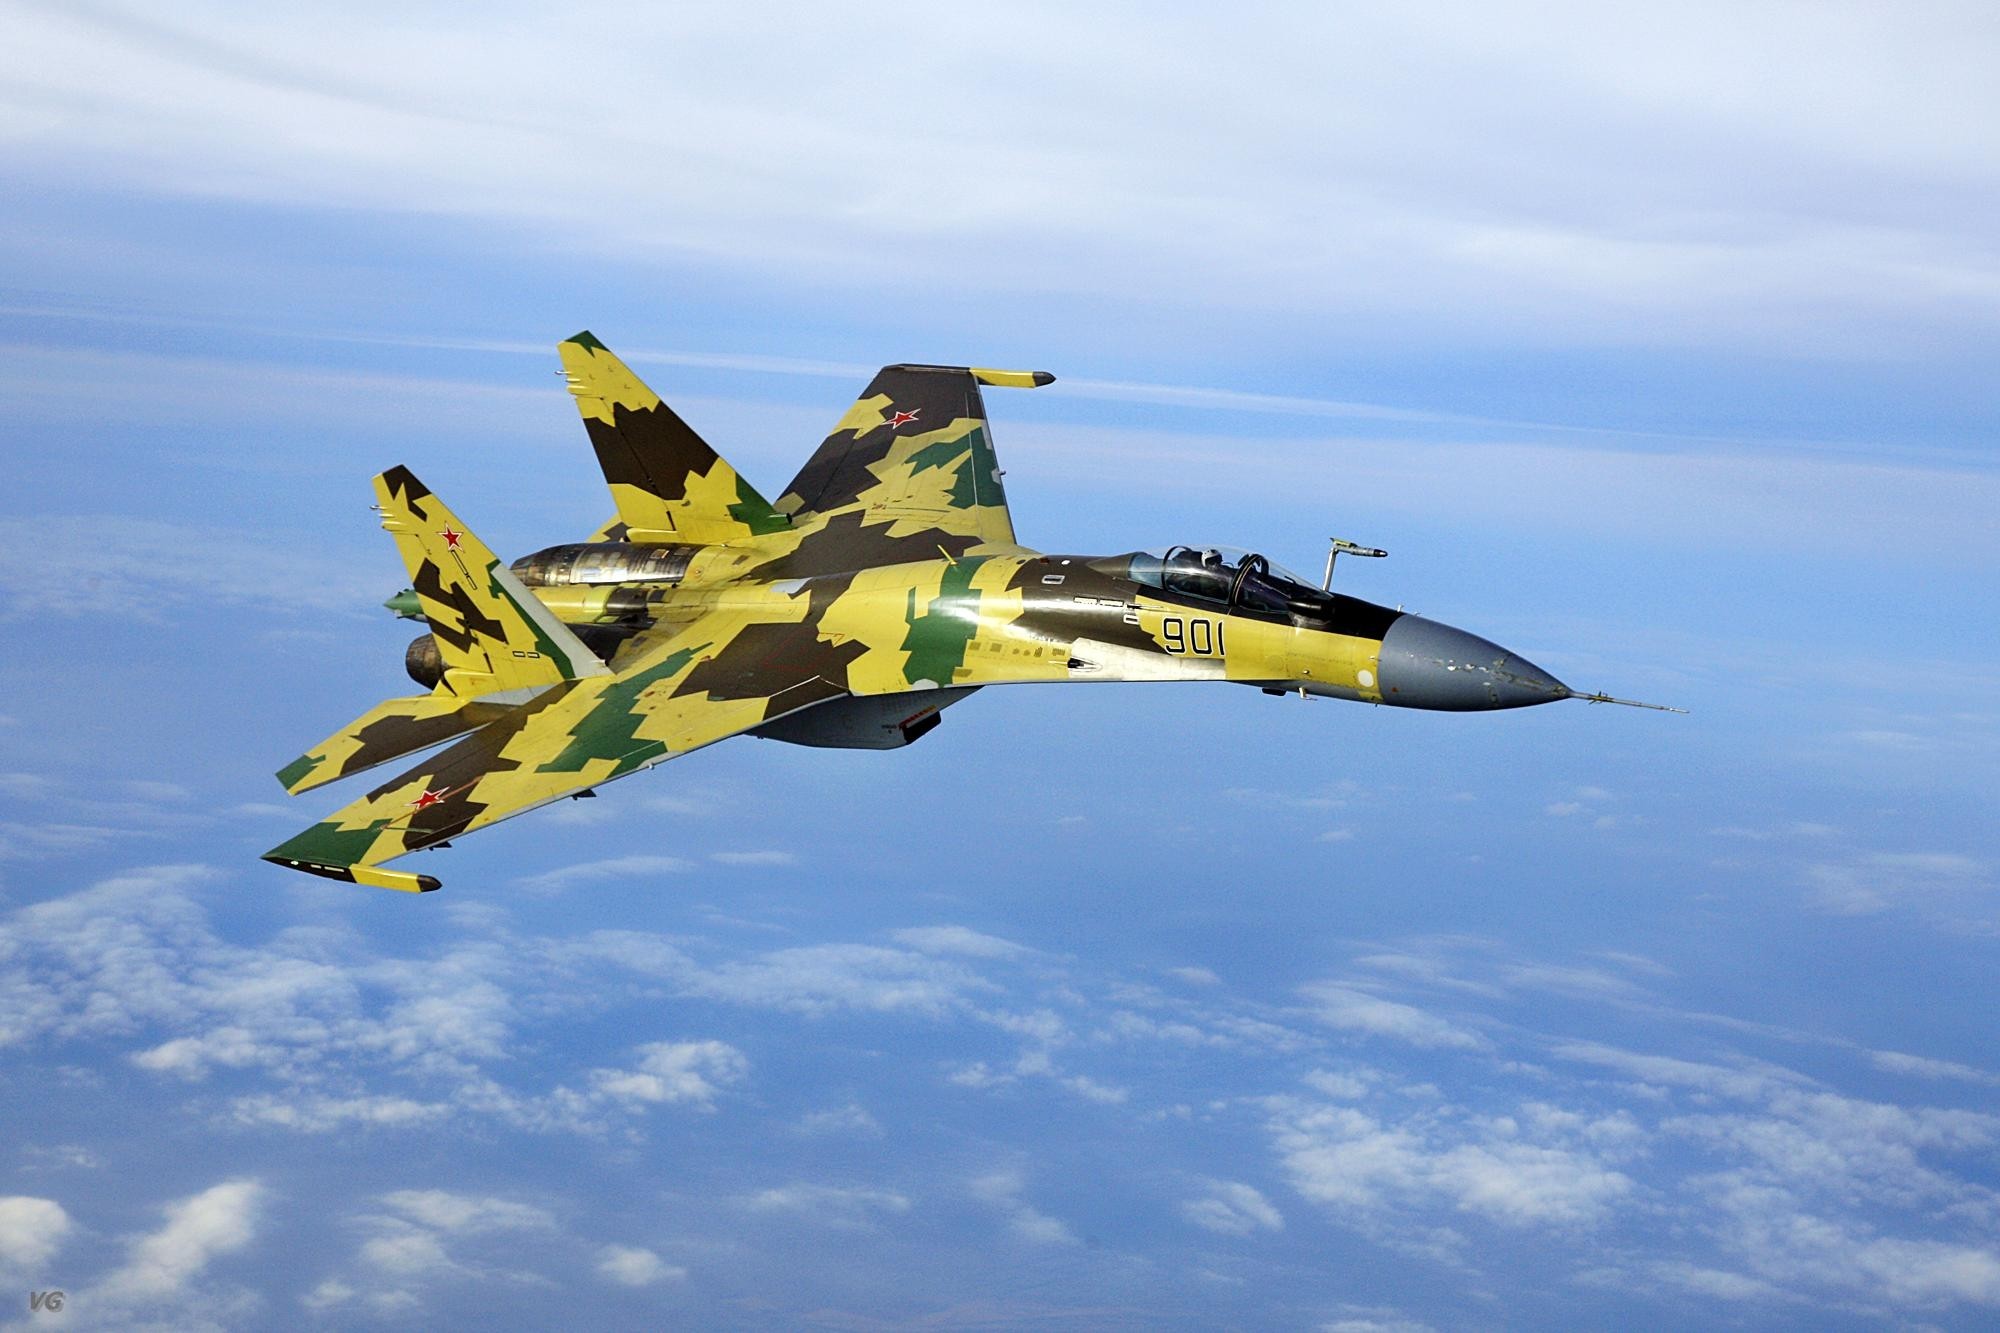 General 2000x1333 Sukhoi Su-35 aircraft military military aircraft Russian Air Force vehicle numbers military vehicle Sukhoi Russian/Soviet aircraft